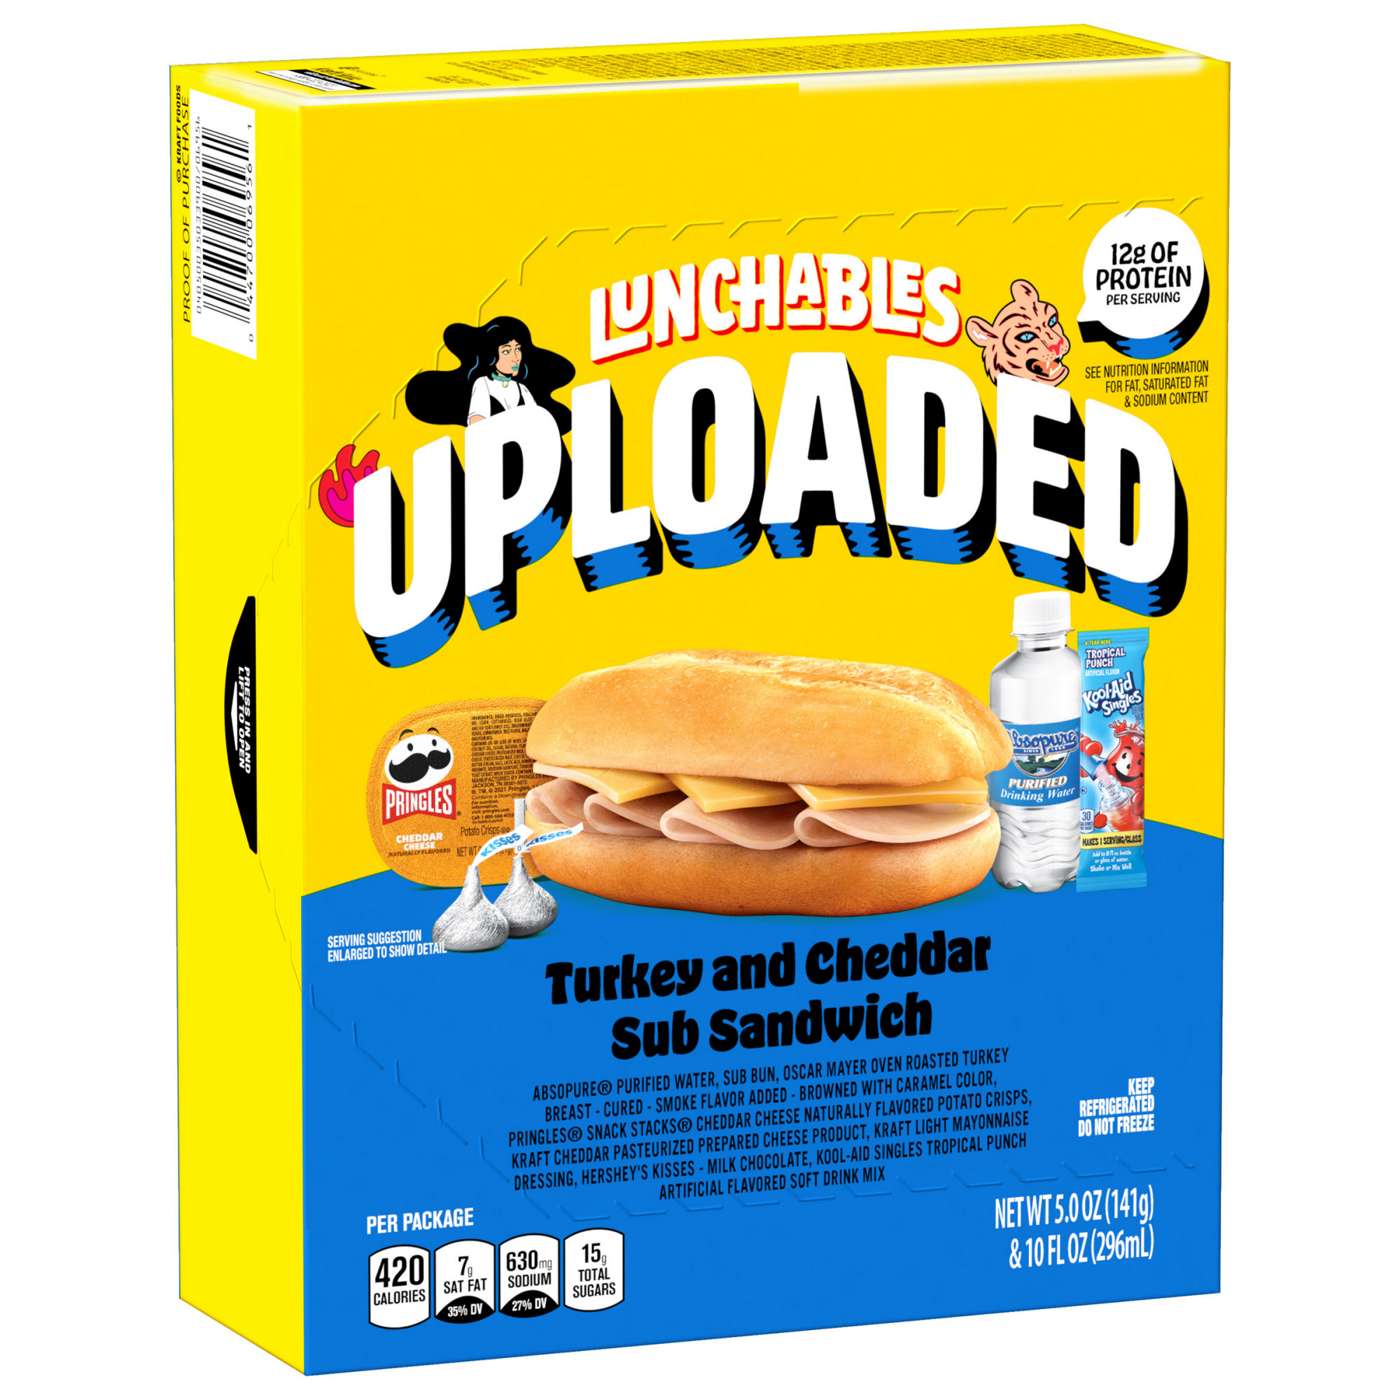 Lunchables Uploaded Meal Kit Turkey And Cheddar Cheese Sub Sandwich Shop Snack Trays At H E B